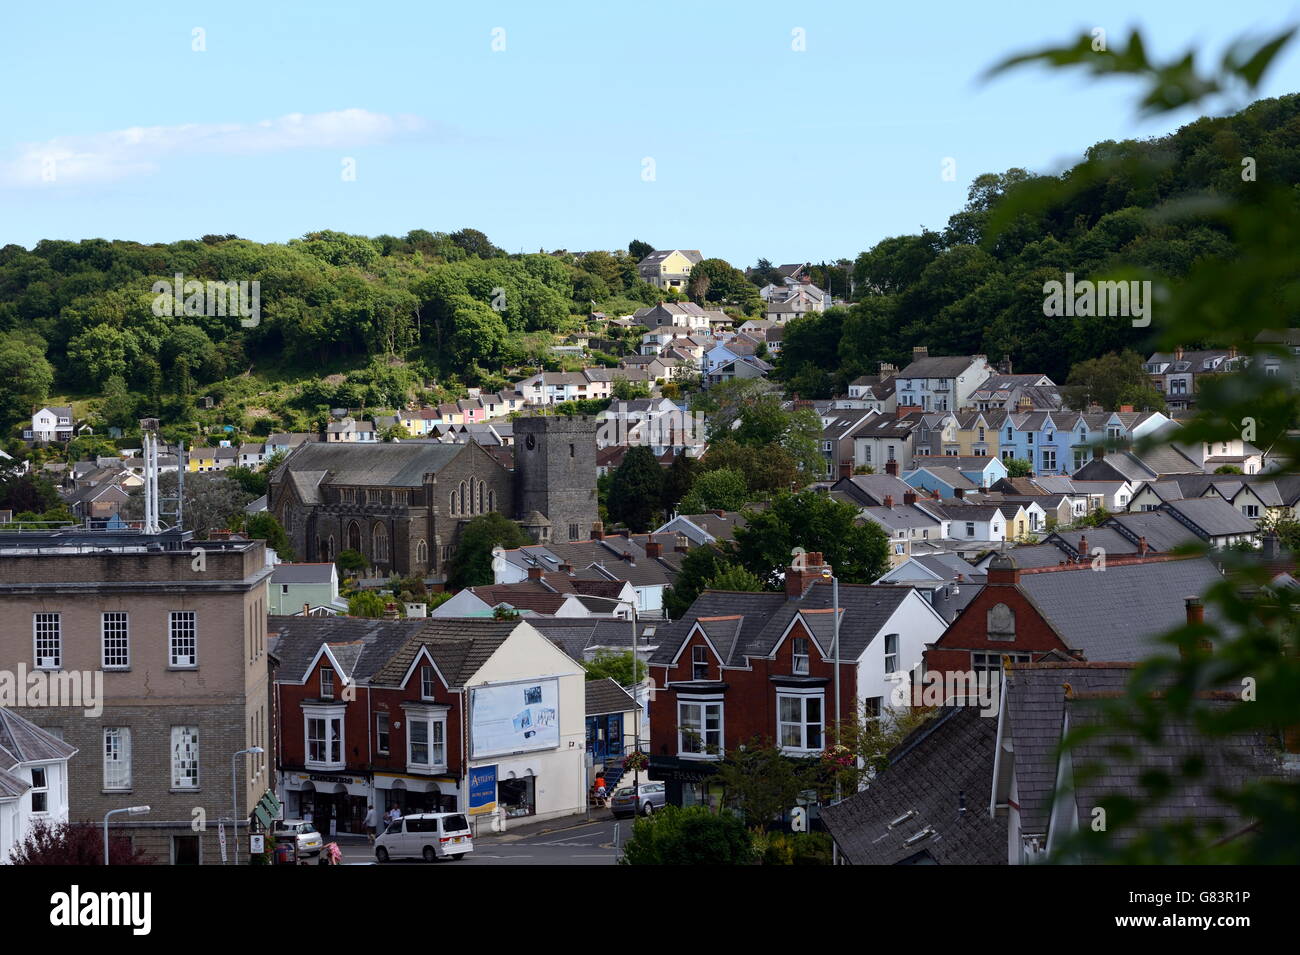 Oystermouth castle seen from Mumbles hill overlooking village, Mumbles, Gower, UK - complete legendary ruin with ramparts, towers and ancient walls. Stock Photo